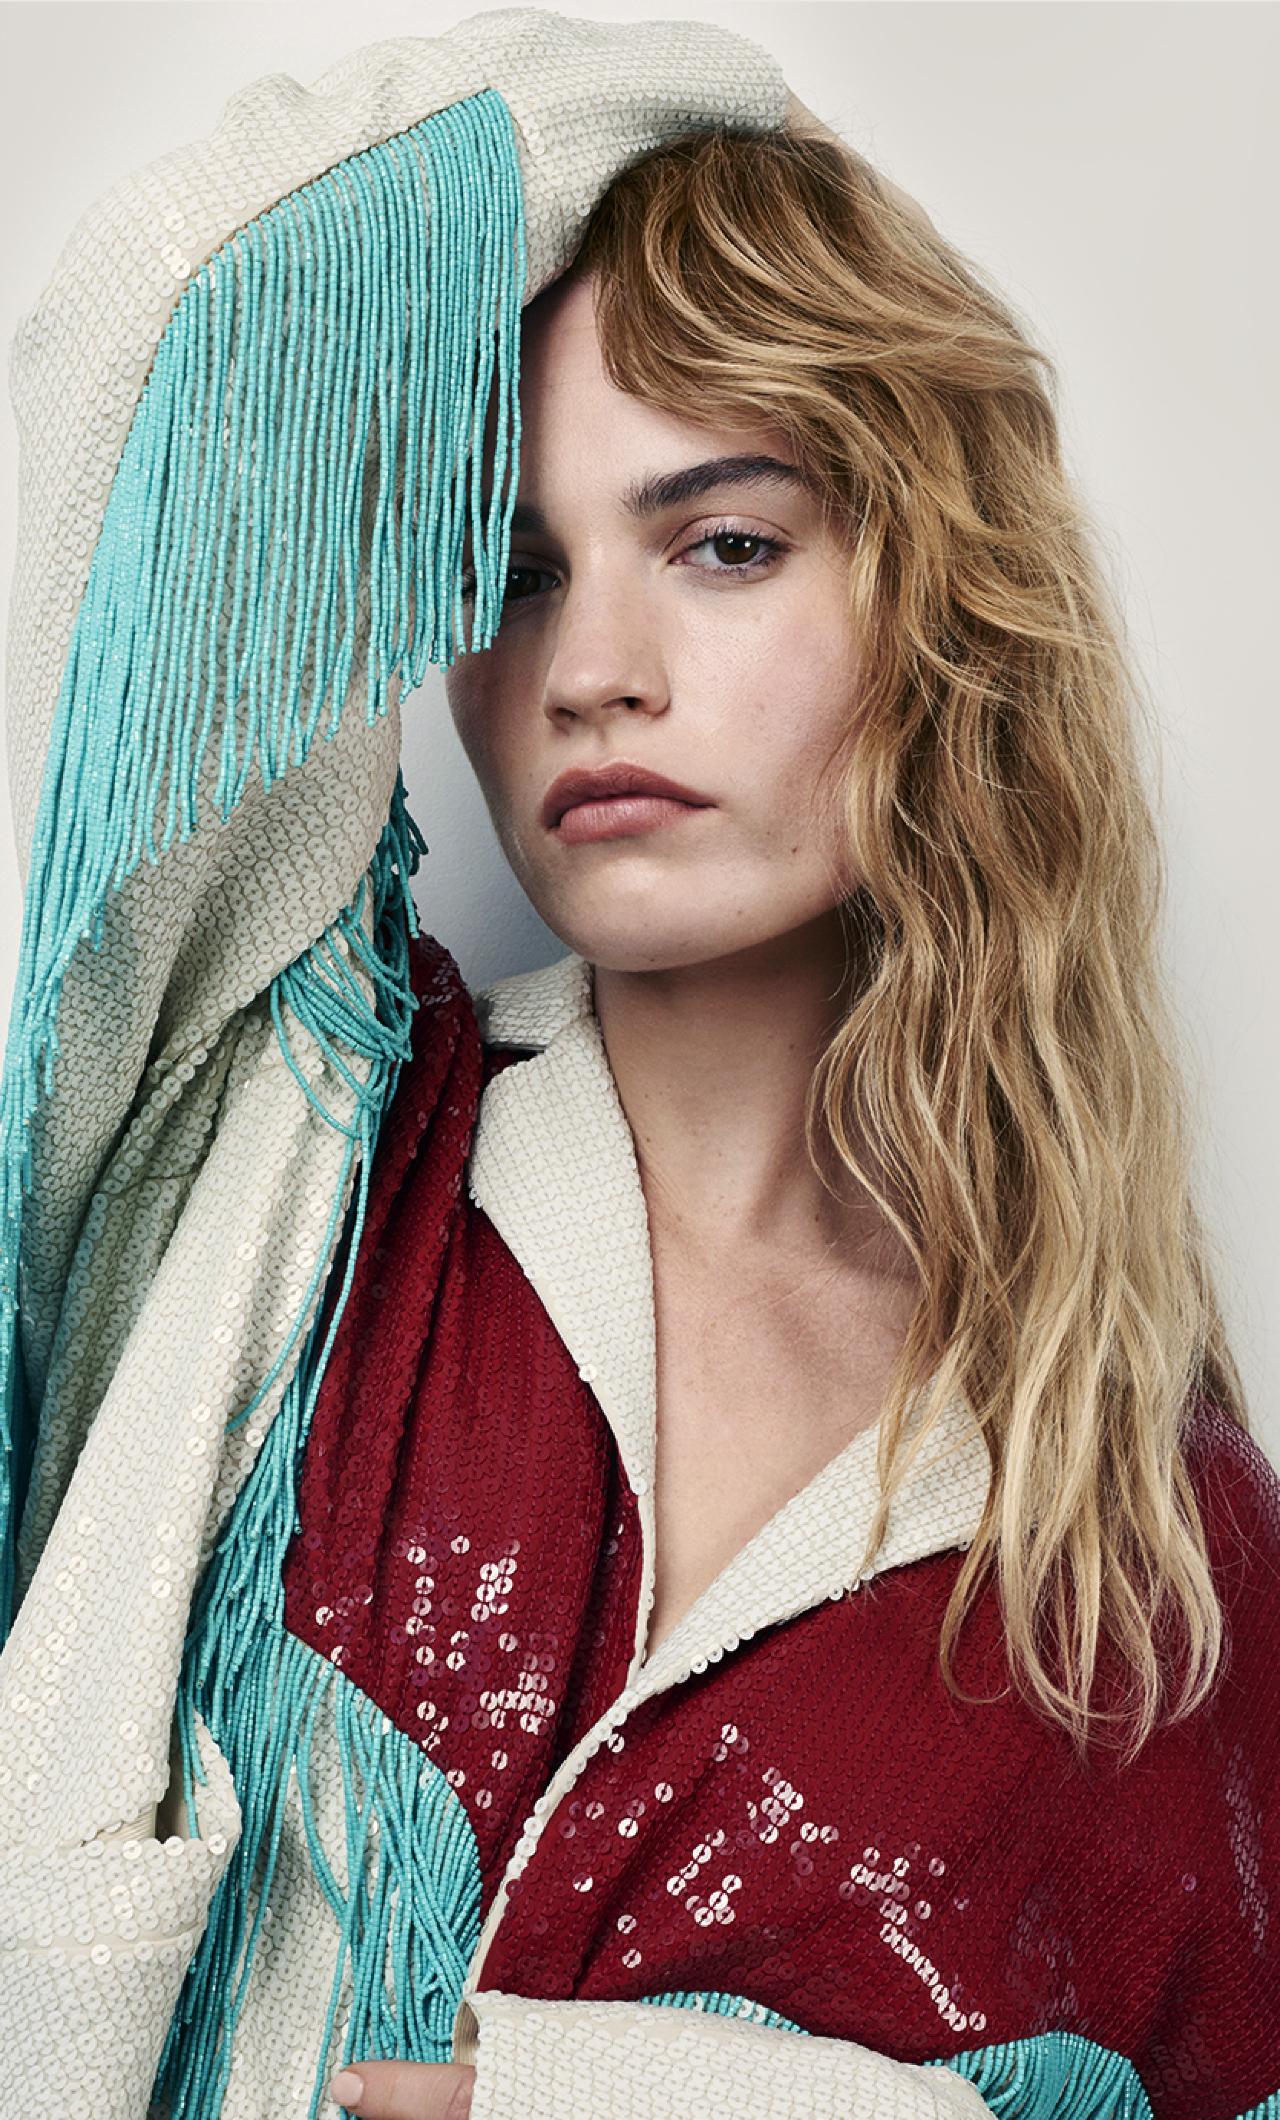 Lily James For Vanity Fair Italy 2018 iPhone 6 plus